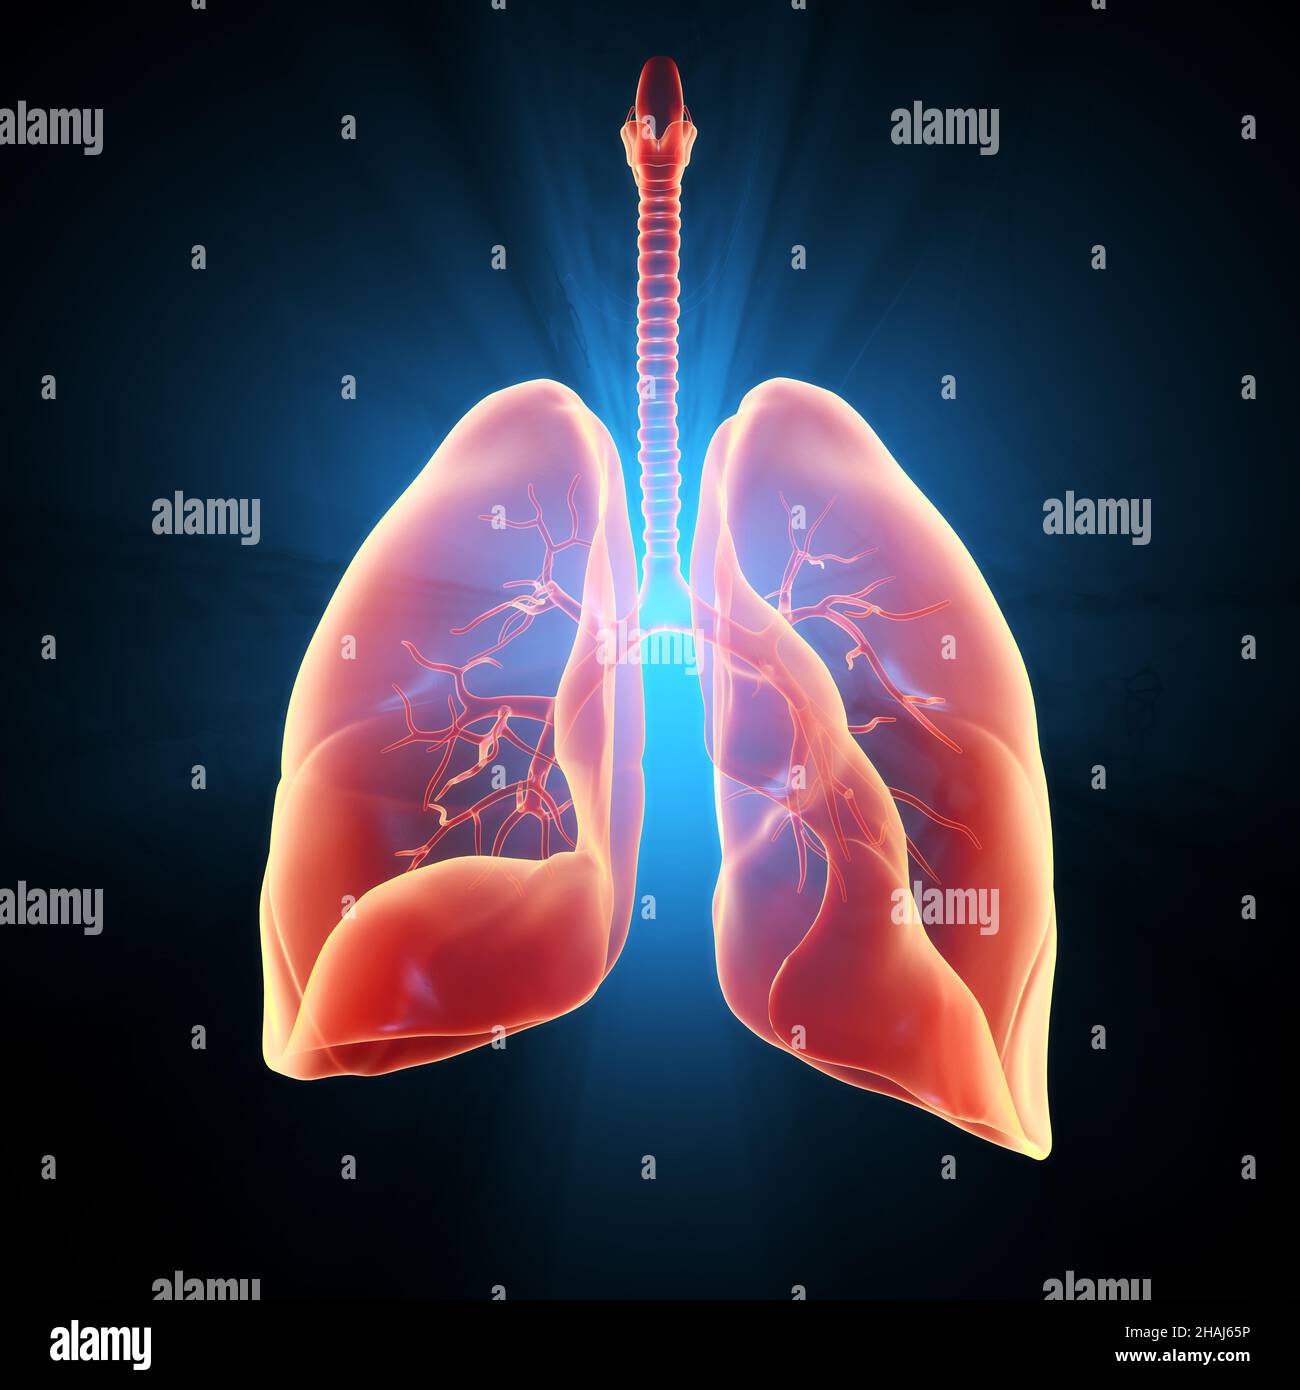 Highlighted carcinoma in right lung, 3D illustration Stock Photo